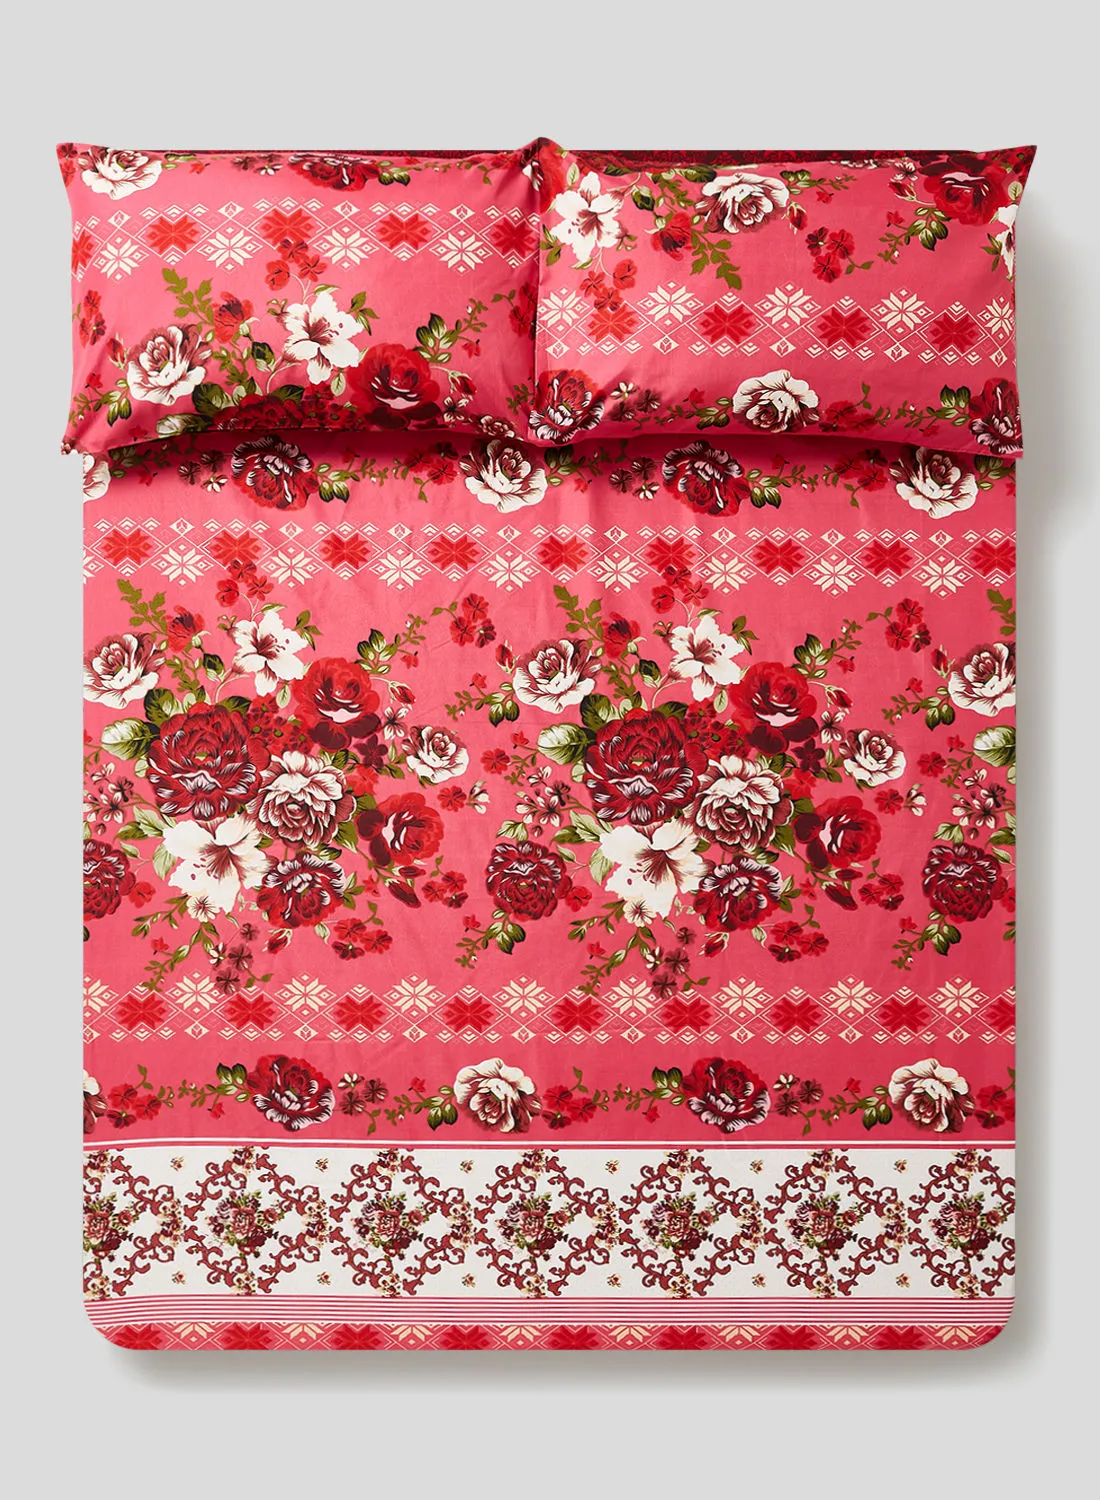 Hometown Fitted Sheet Set Made From 100% Polyester With Pillow Case 50X75 Cm, Bed Linen For 150X200 Cm Twin Size Mattress In Pink Color